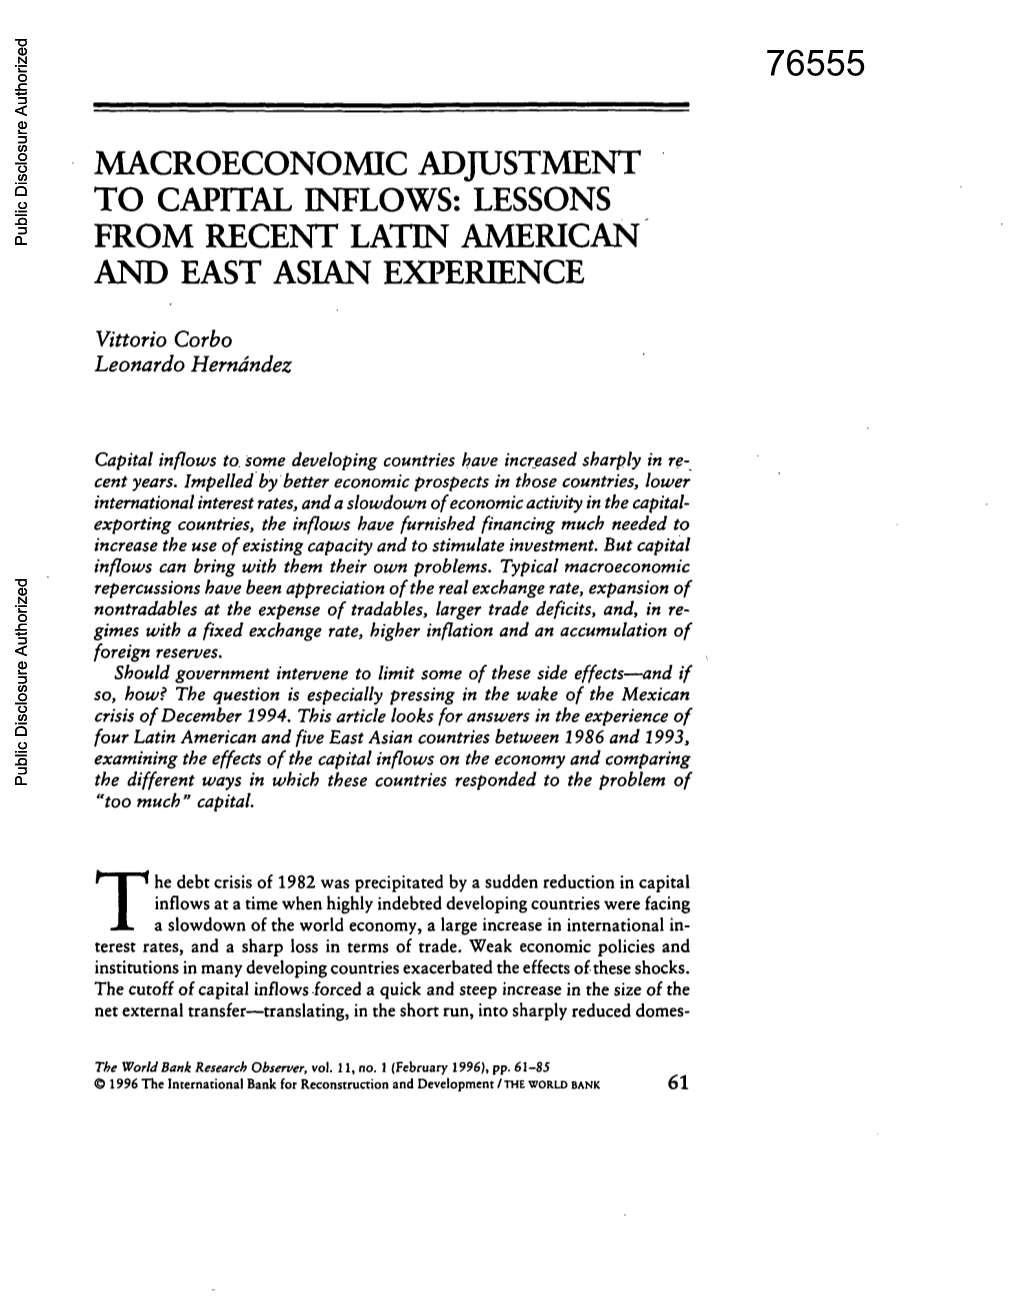 Macroeconomic Adjustment to Capital Inflows: Lessons